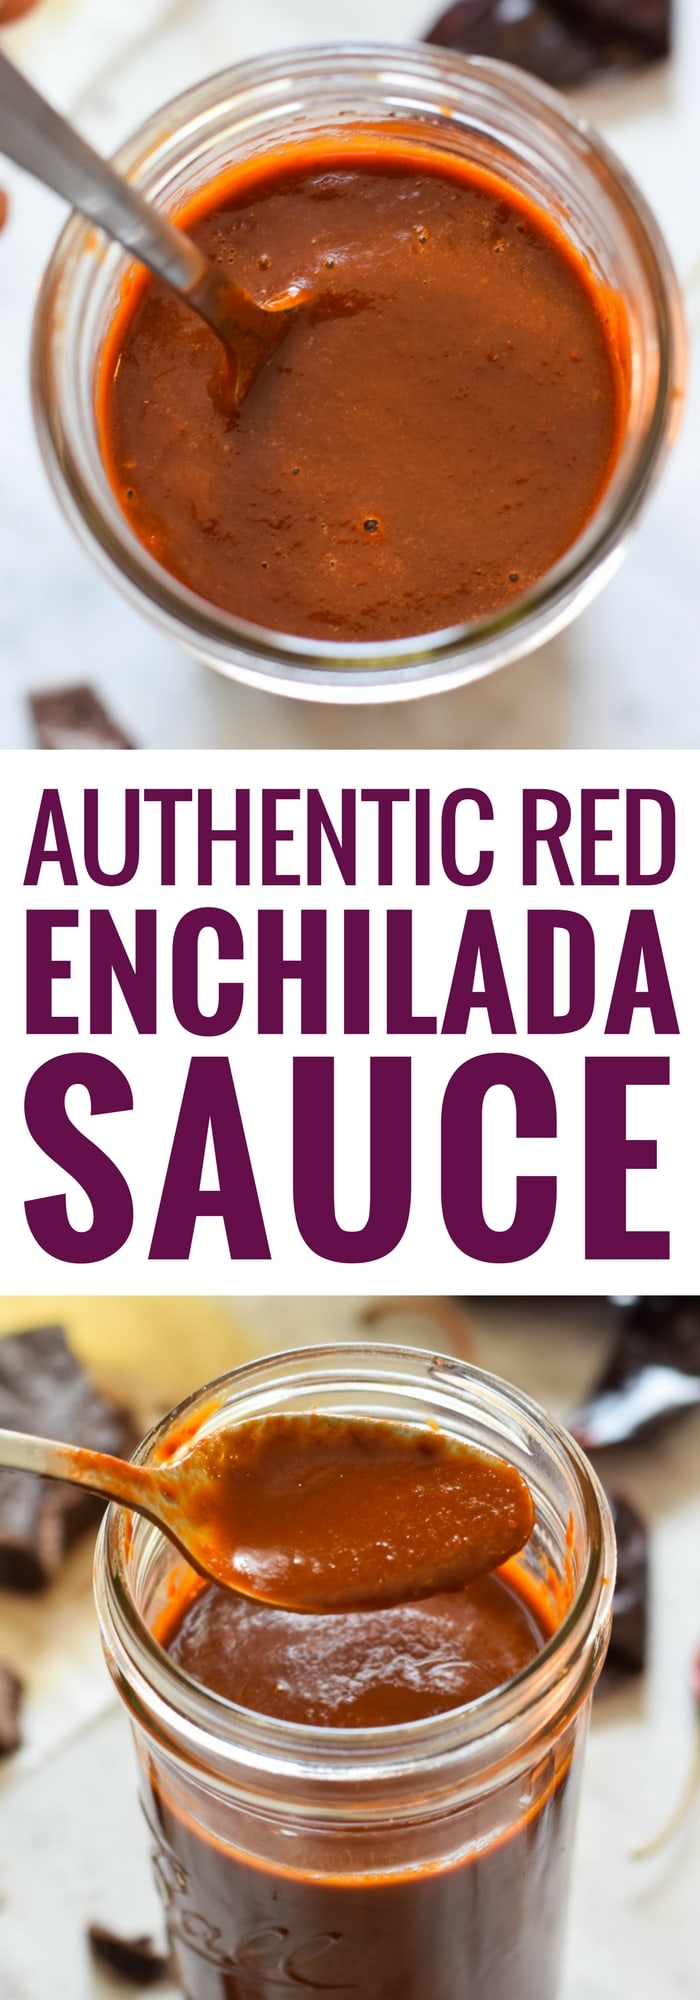 authentic mexican brown enchilada sauce recipe